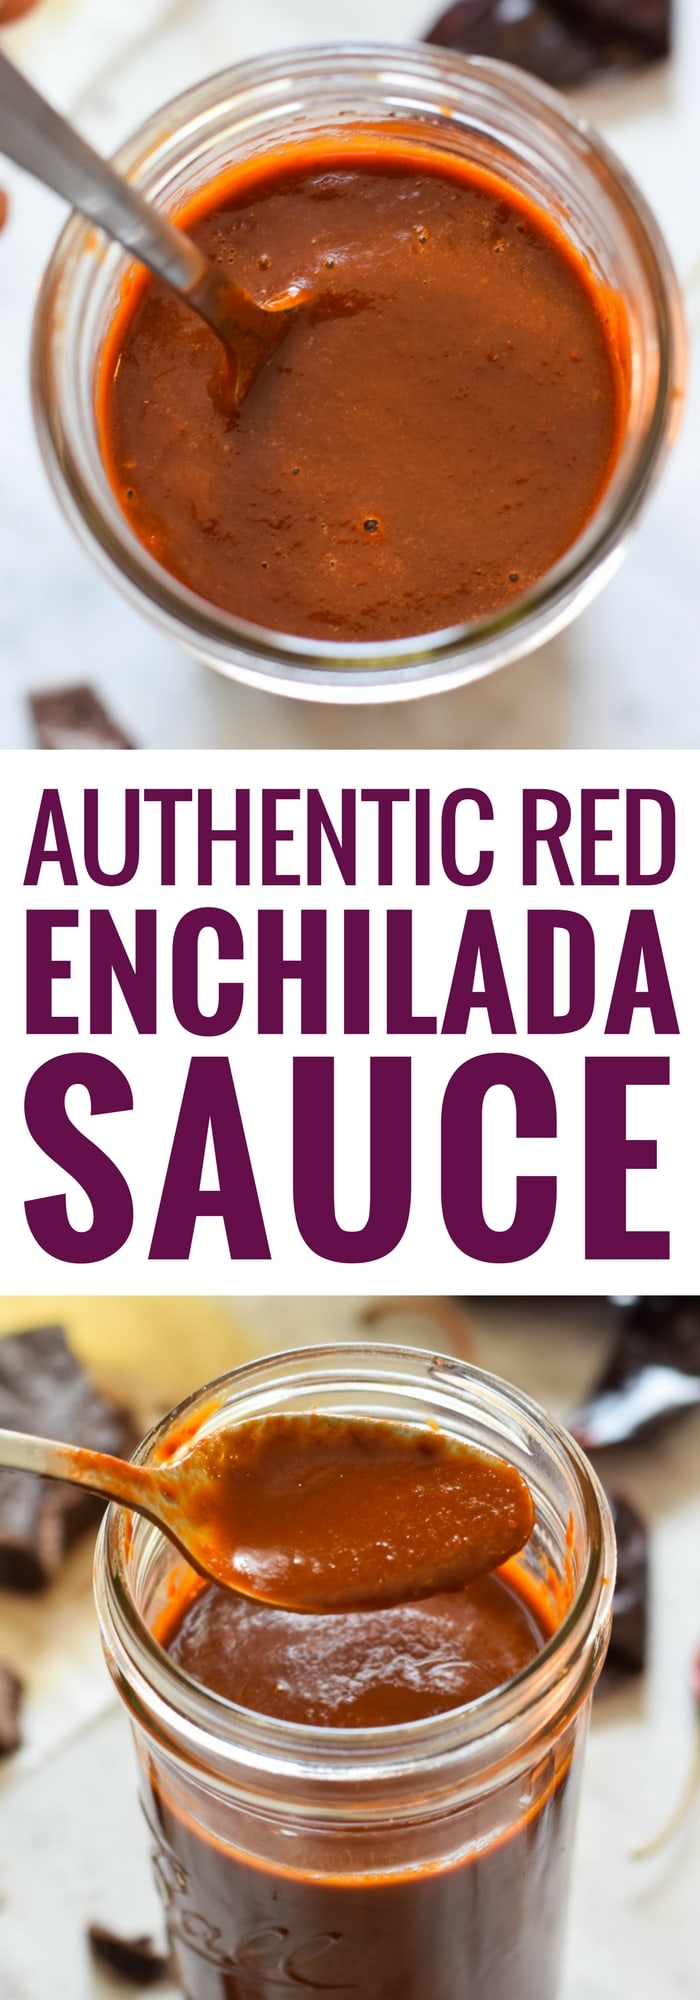 authentic mexican brown enchilada sauce recipe